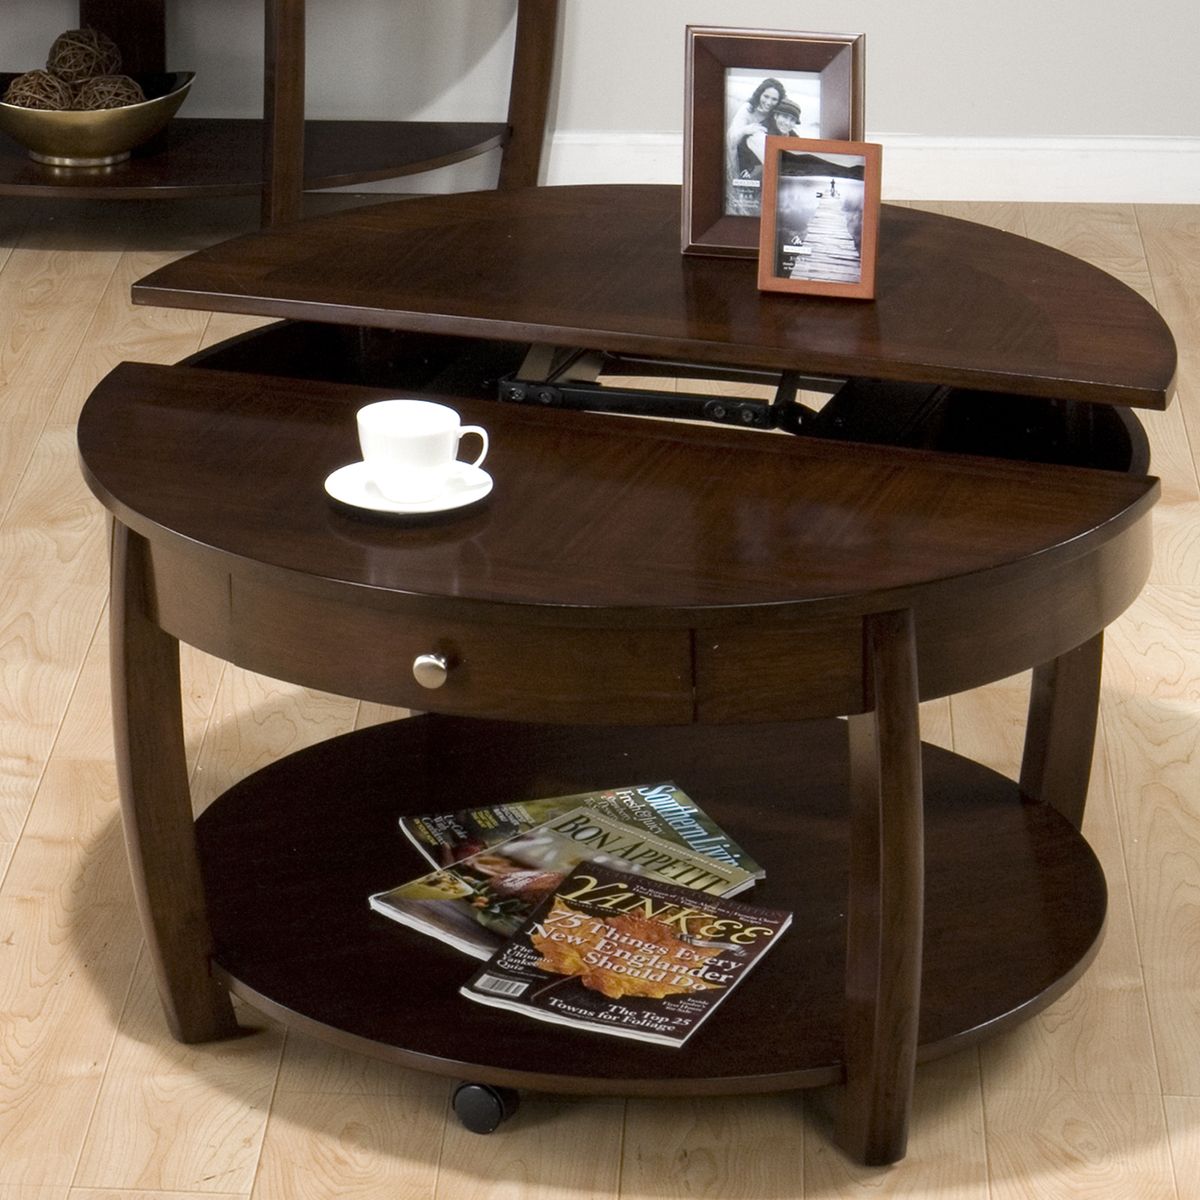 The Round Coffee Tables With Storage – The Simple And Compact Furniture Inside Round Coffee Tables With Storage (Gallery 1 of 20)